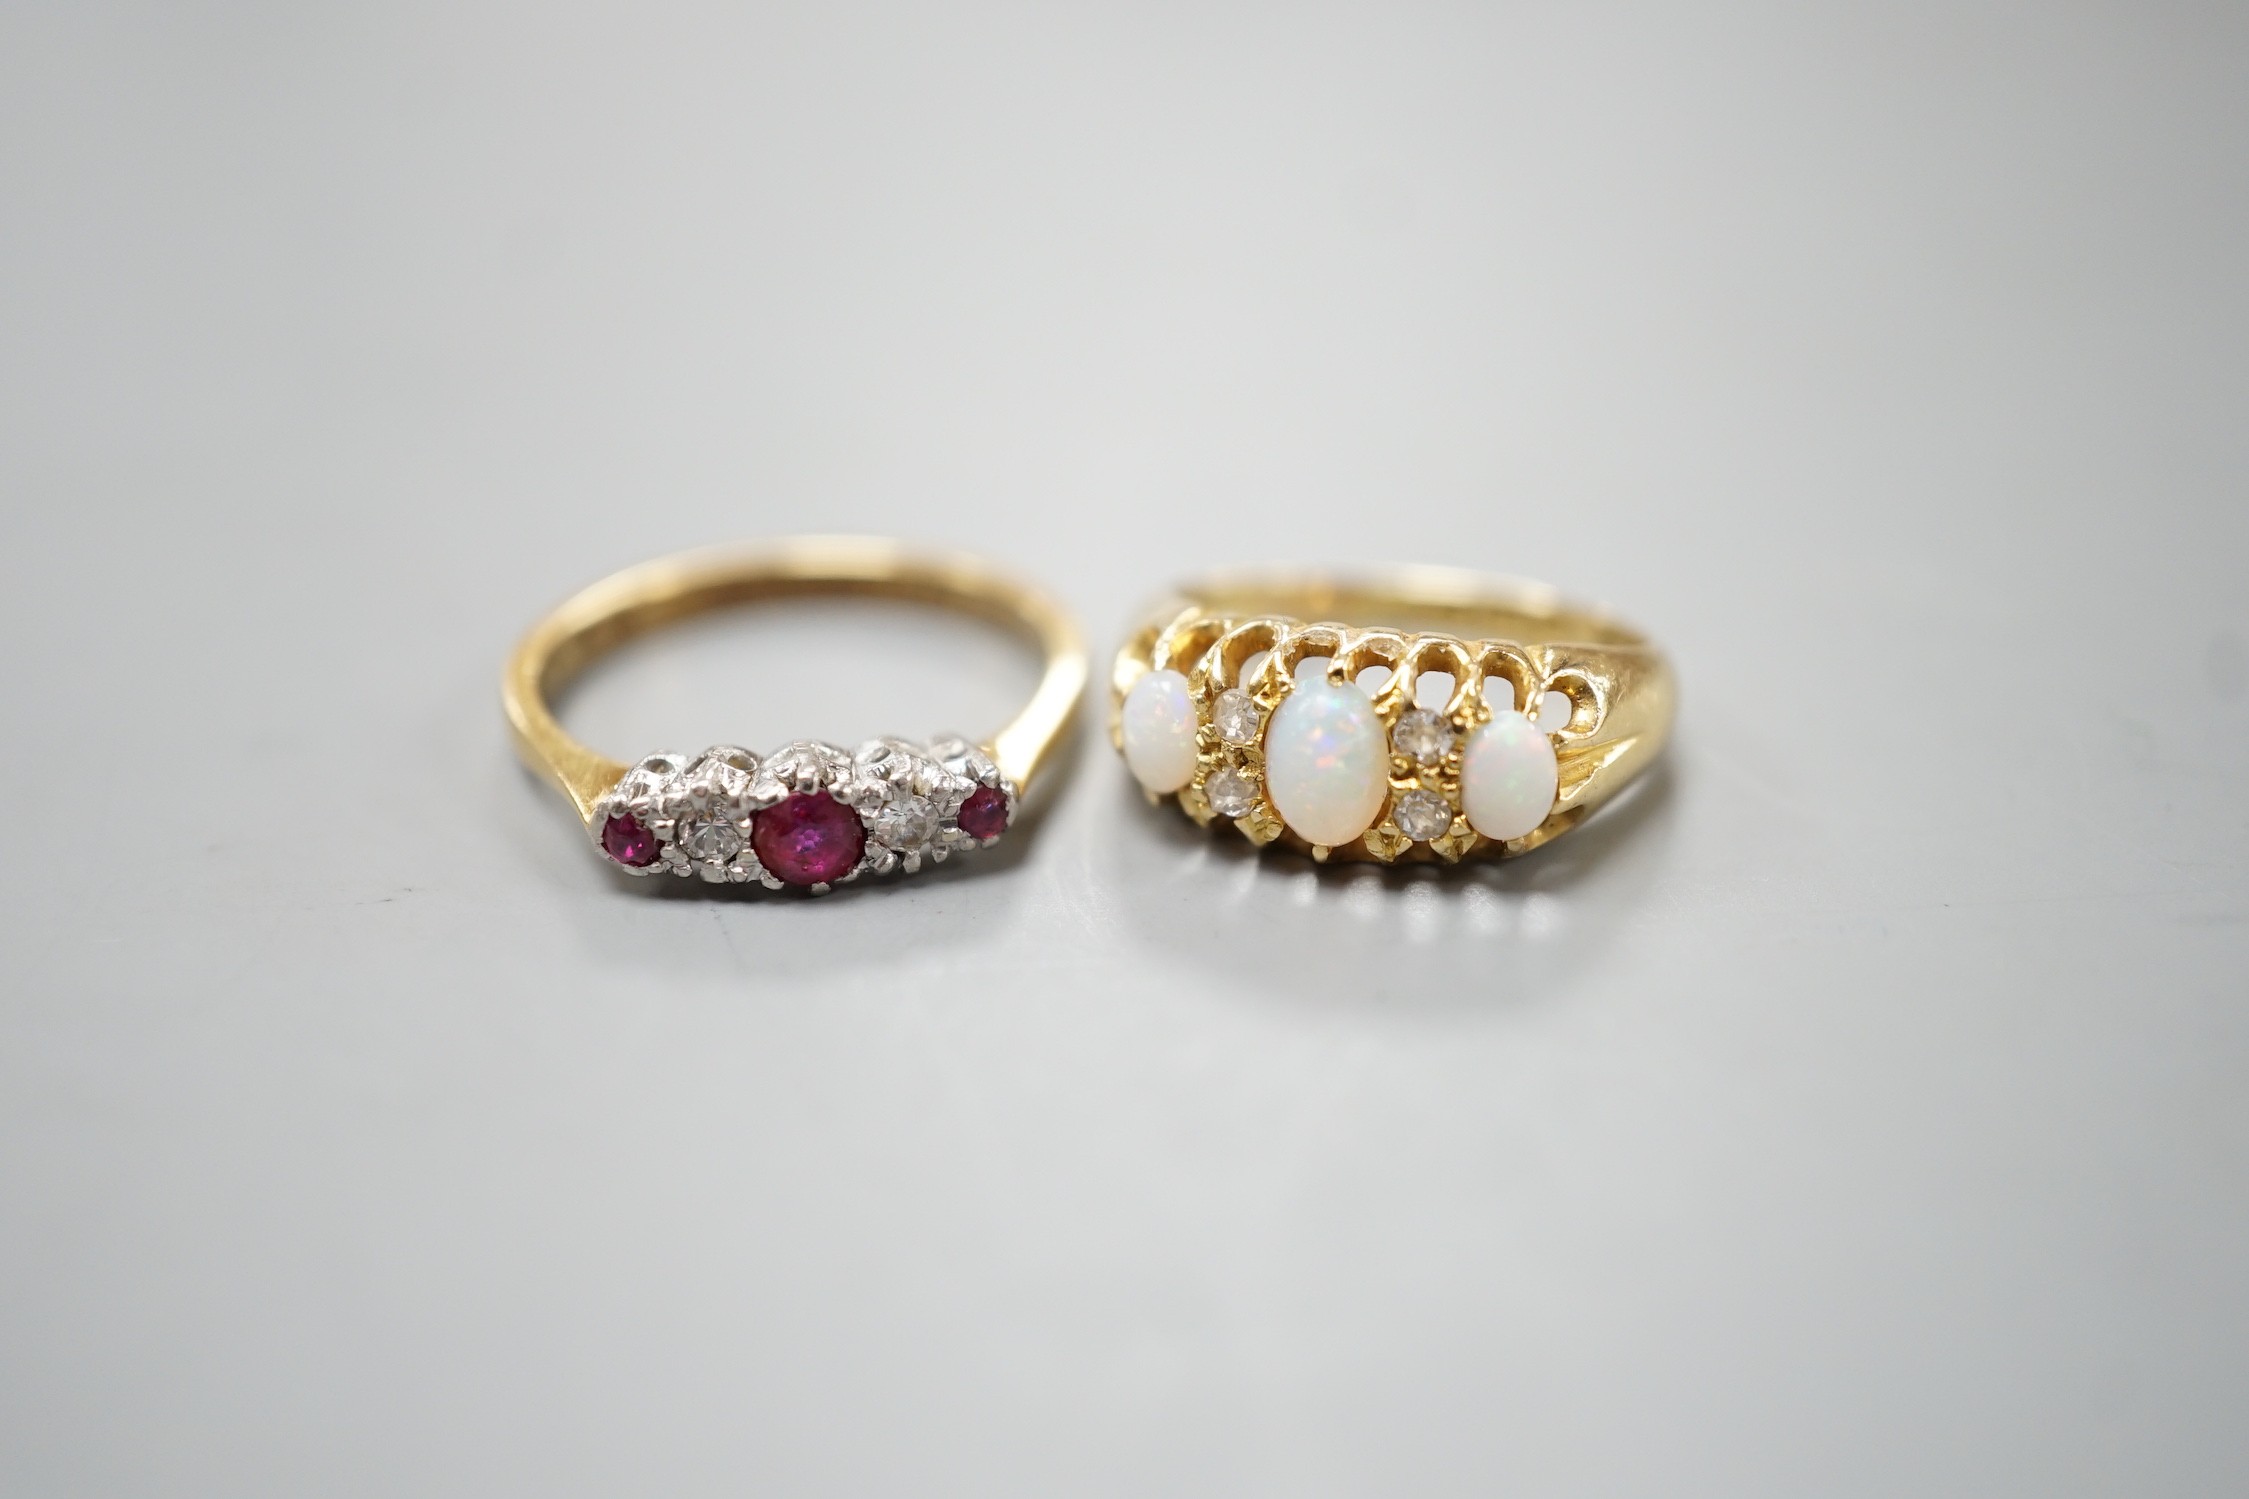 An Edwardian 18ct gold and three stone white opal set ring, with diamond chip spacers, size F and an 18ct and plat, three stone ruby and two stone diamond set ring, size M, gross weight 5.7 grams.